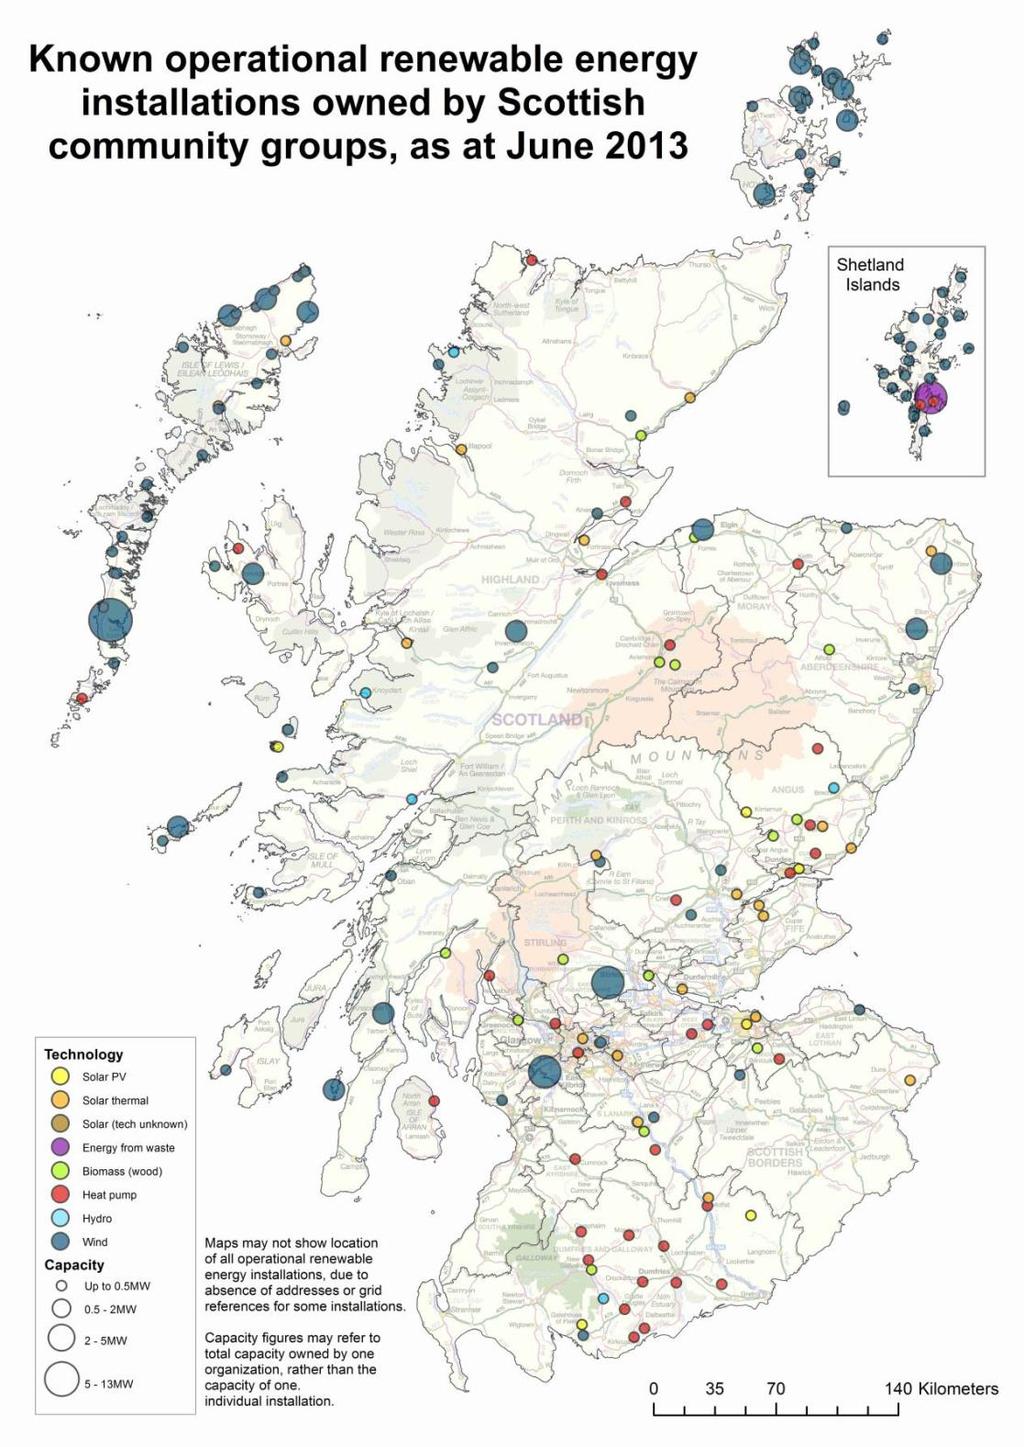 Energy generation There is over a decade of experience in Scotland of supporting communities to develop their own renewables schemes, resulting in over 400 schemes, with active projects ranging from